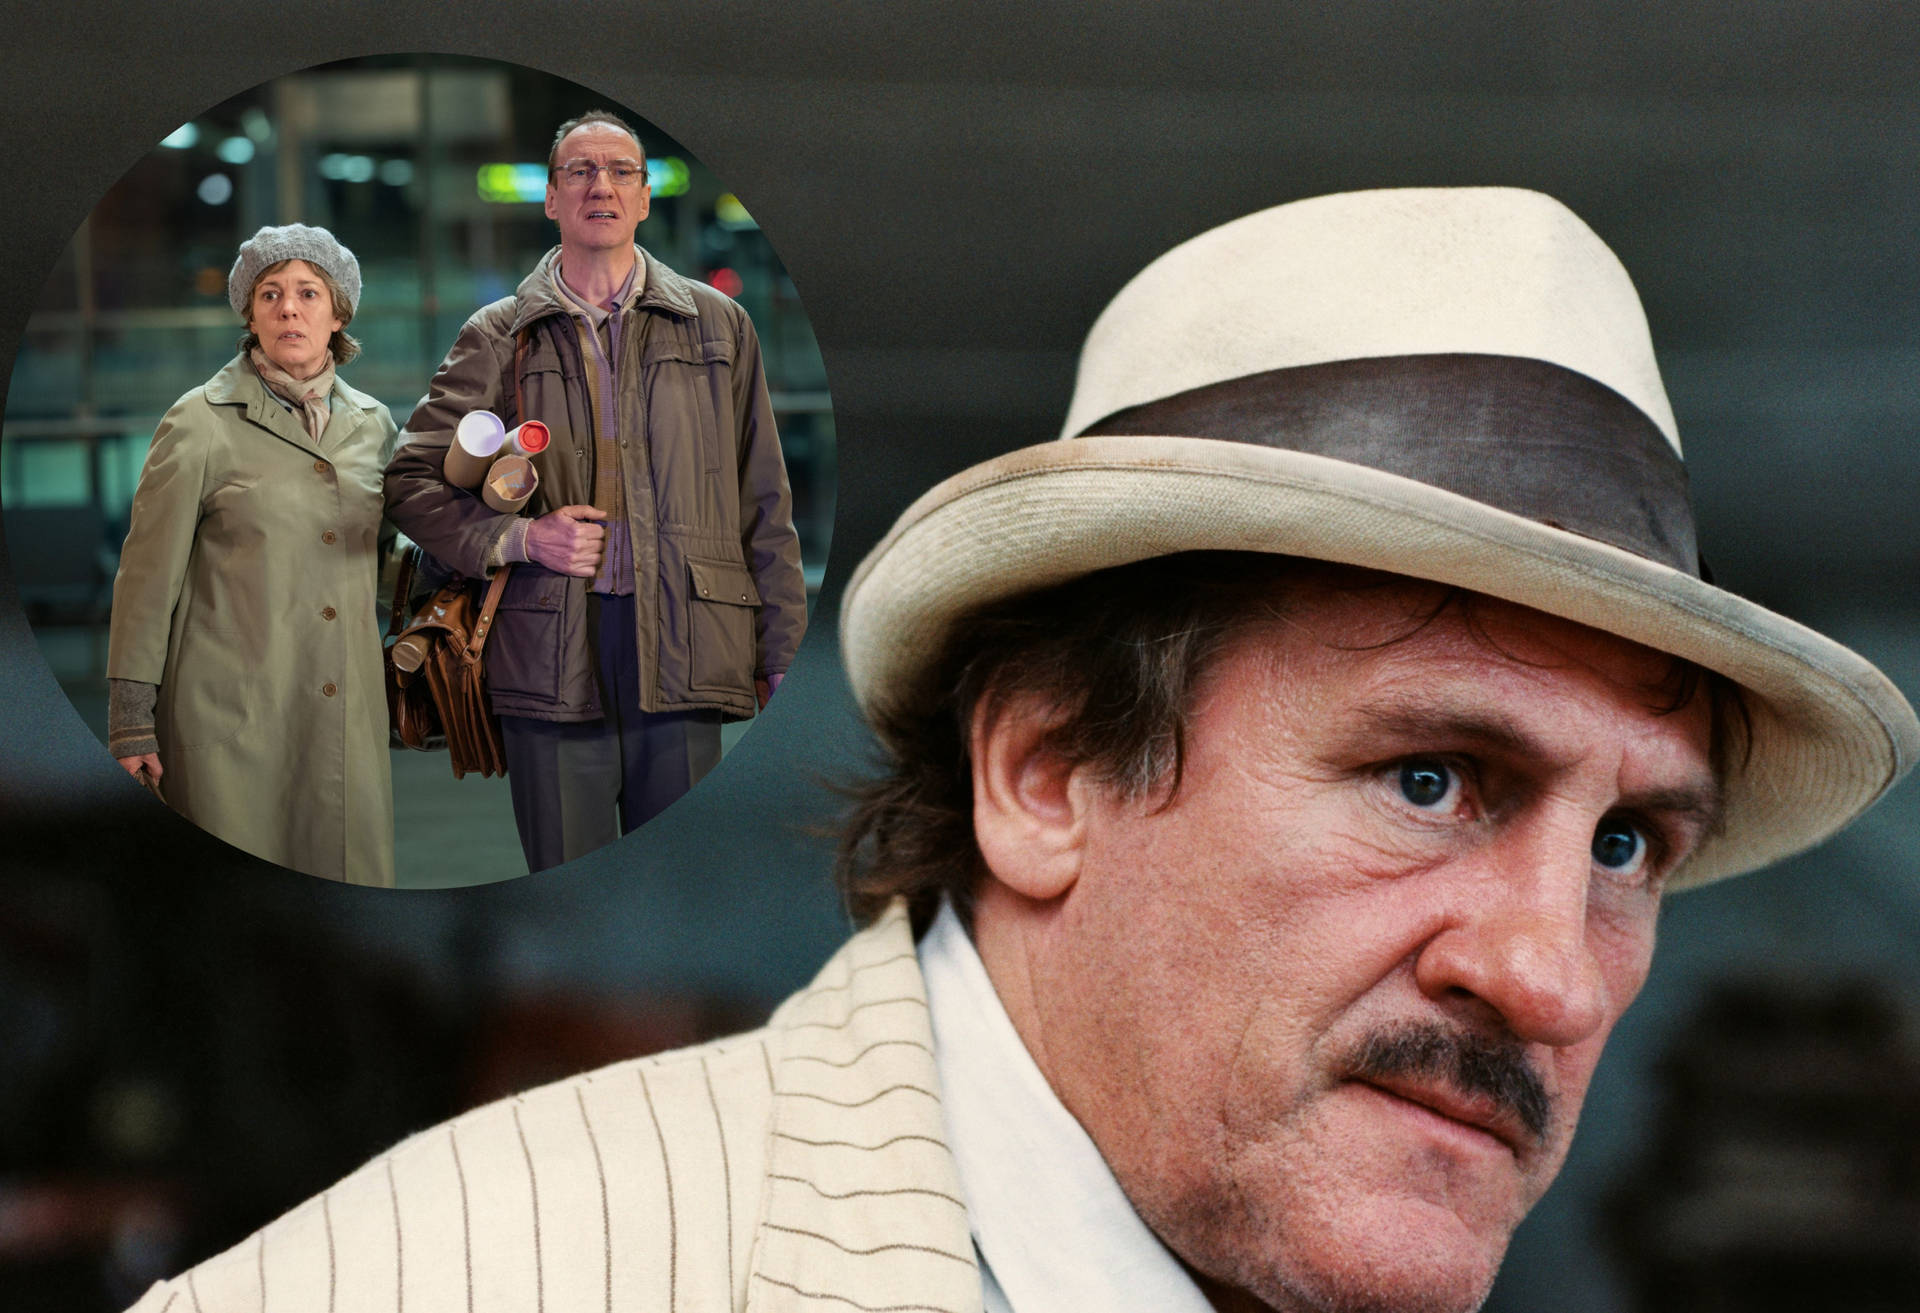 The iconic French actor Gérard Depardieu stylishly dons a Fedora. Wallpaper